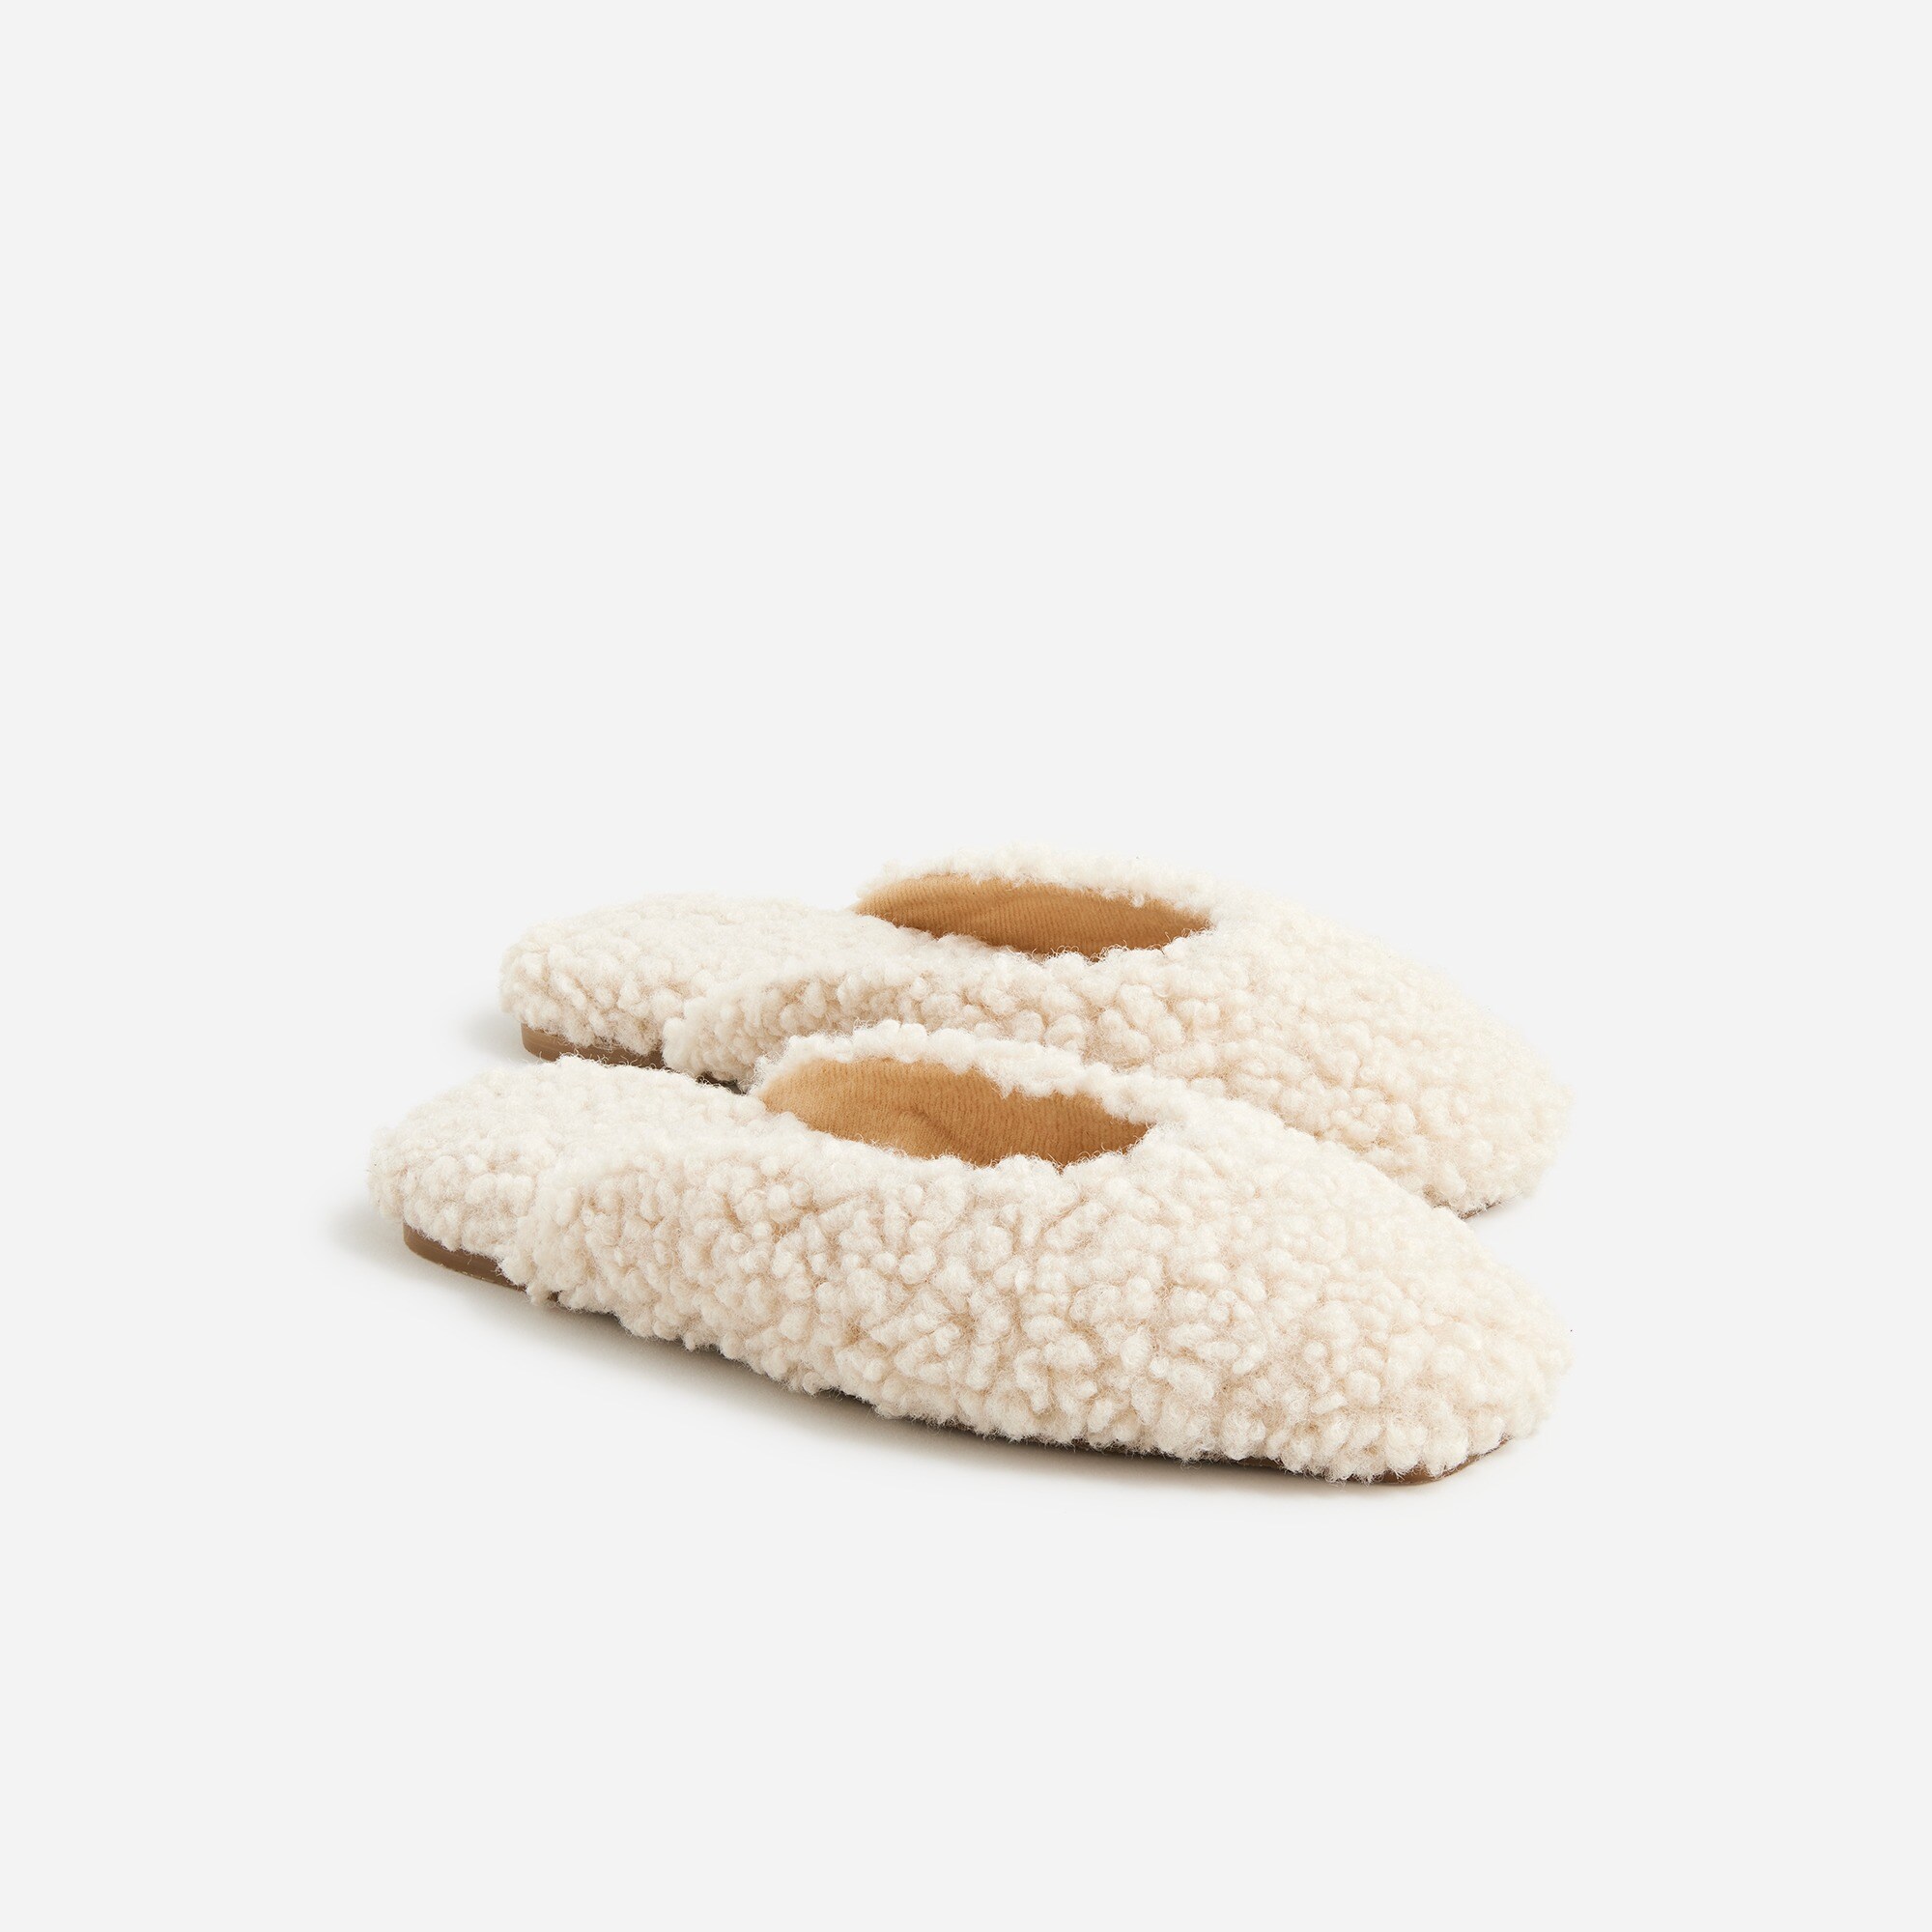  House slippers in sherpa